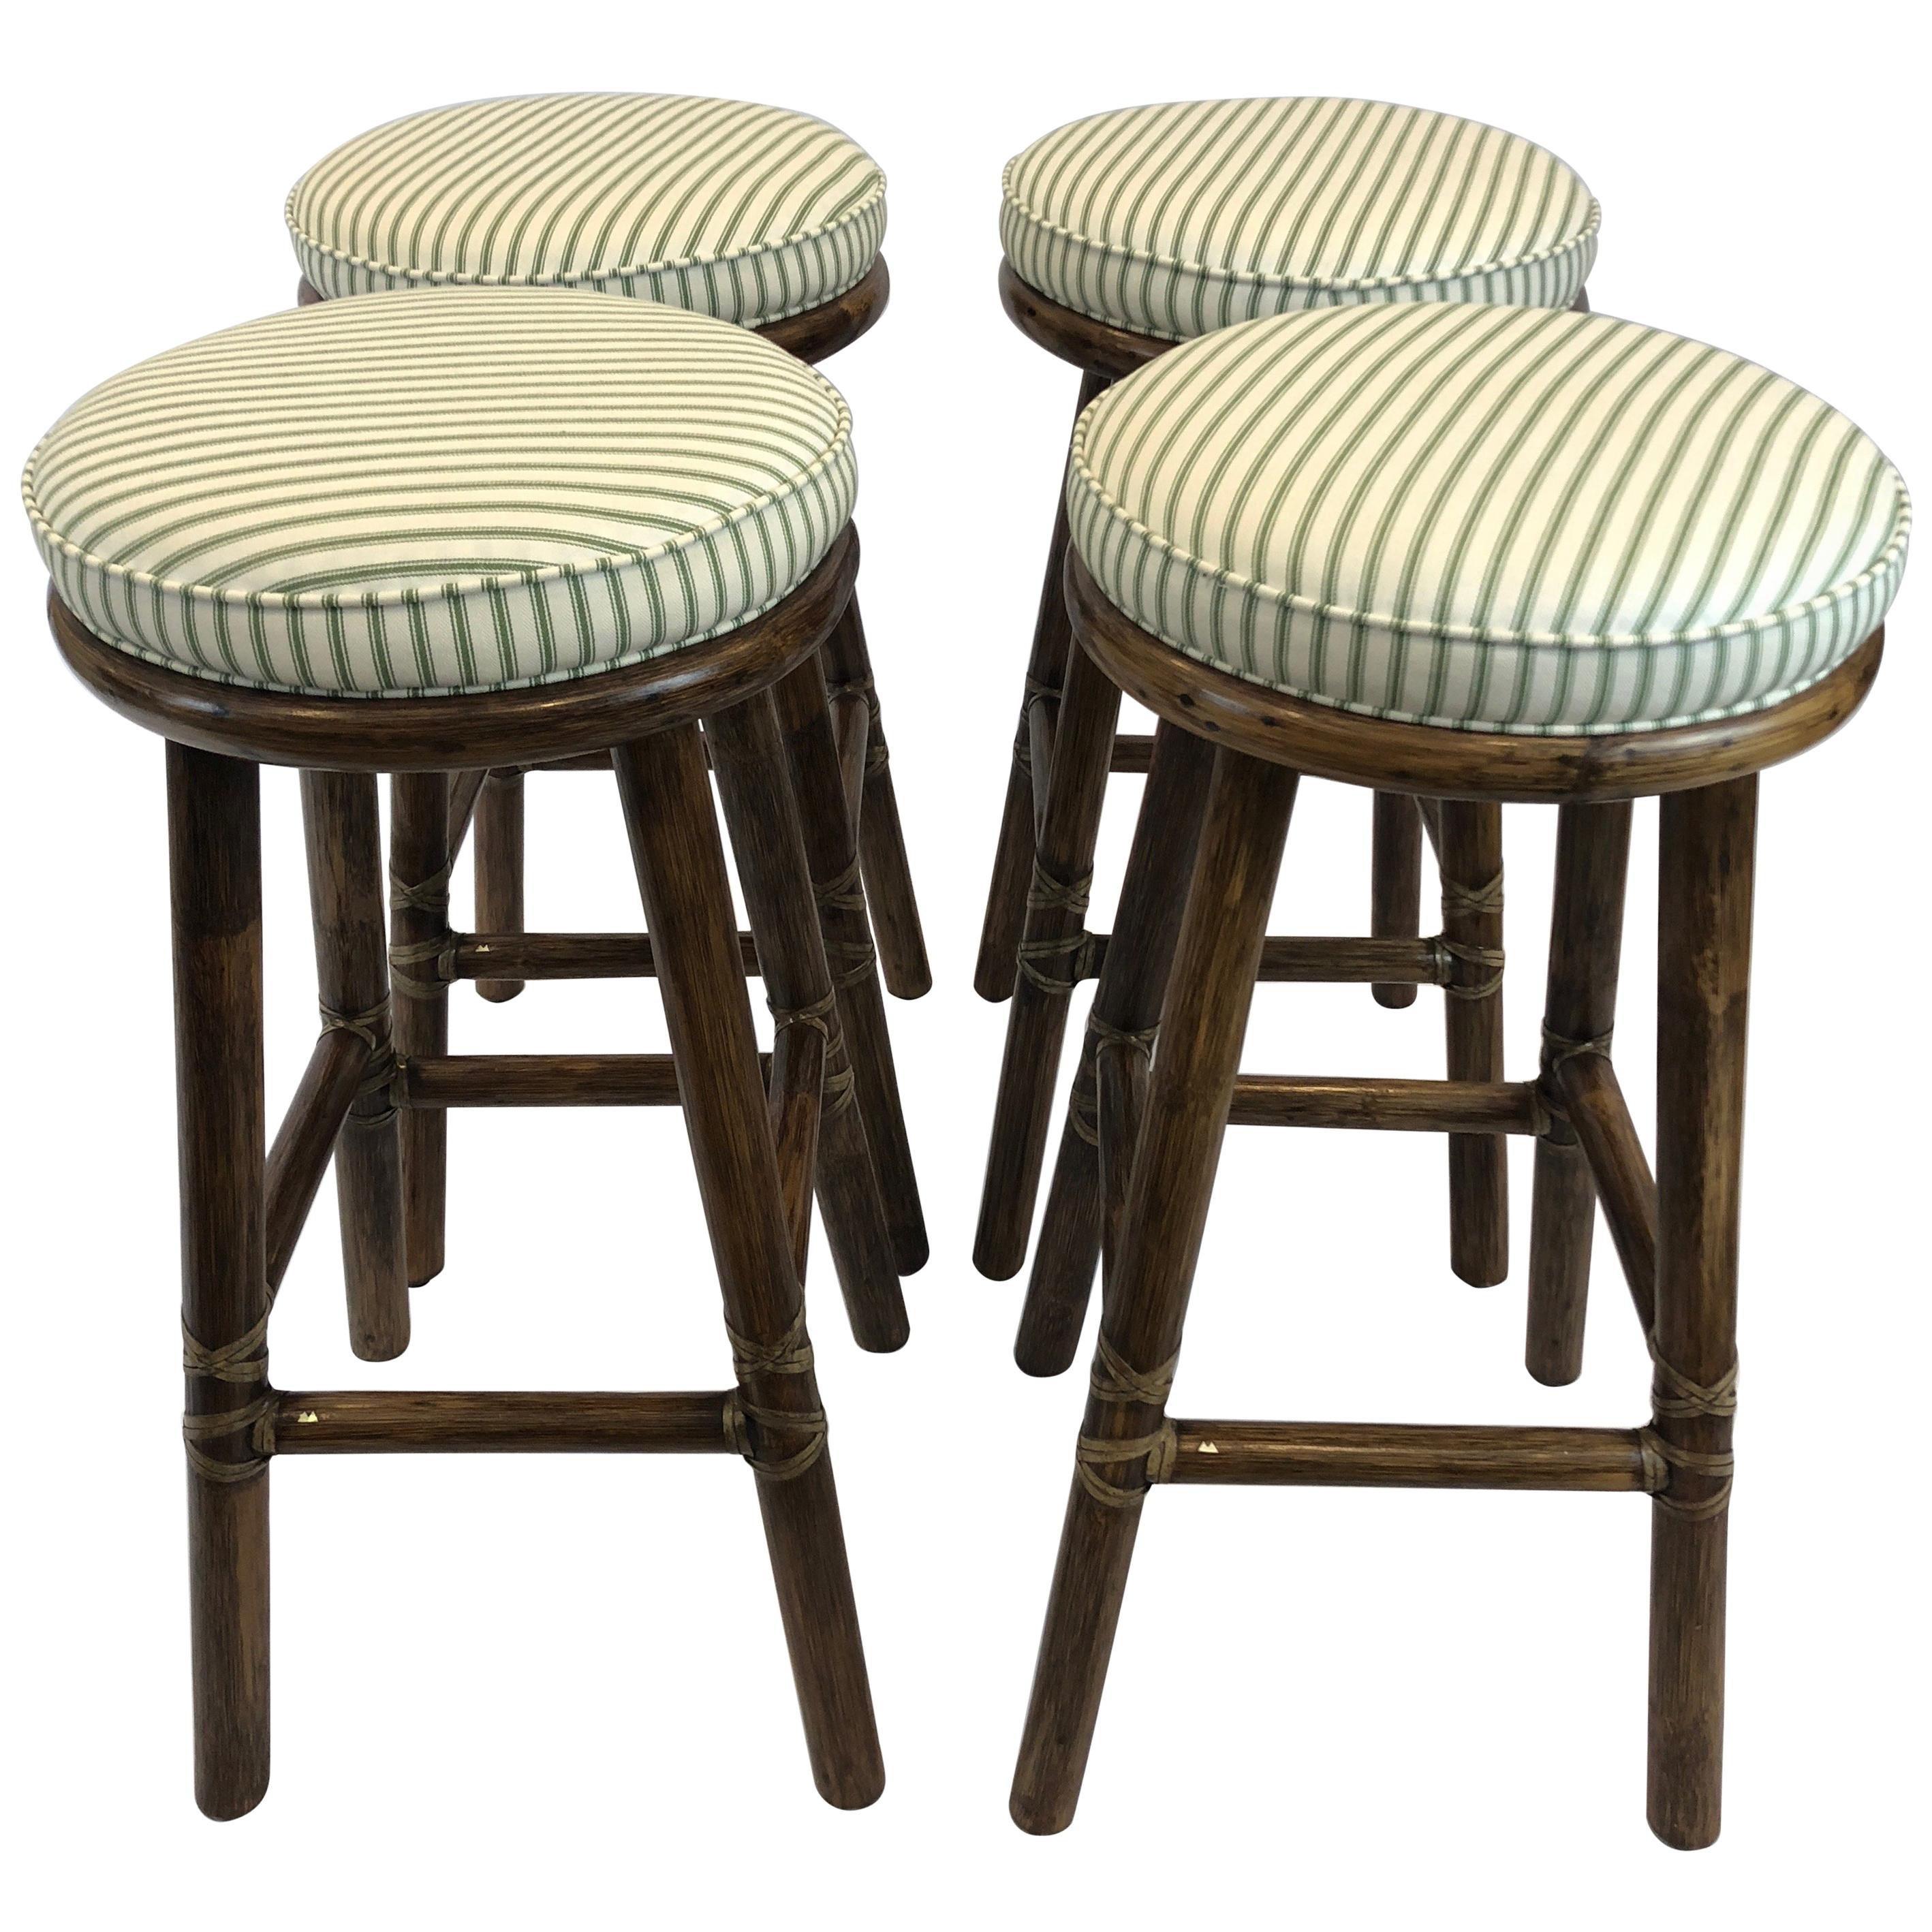 Top of the Line McGuire Set of 4 Bamboo Bar Stools